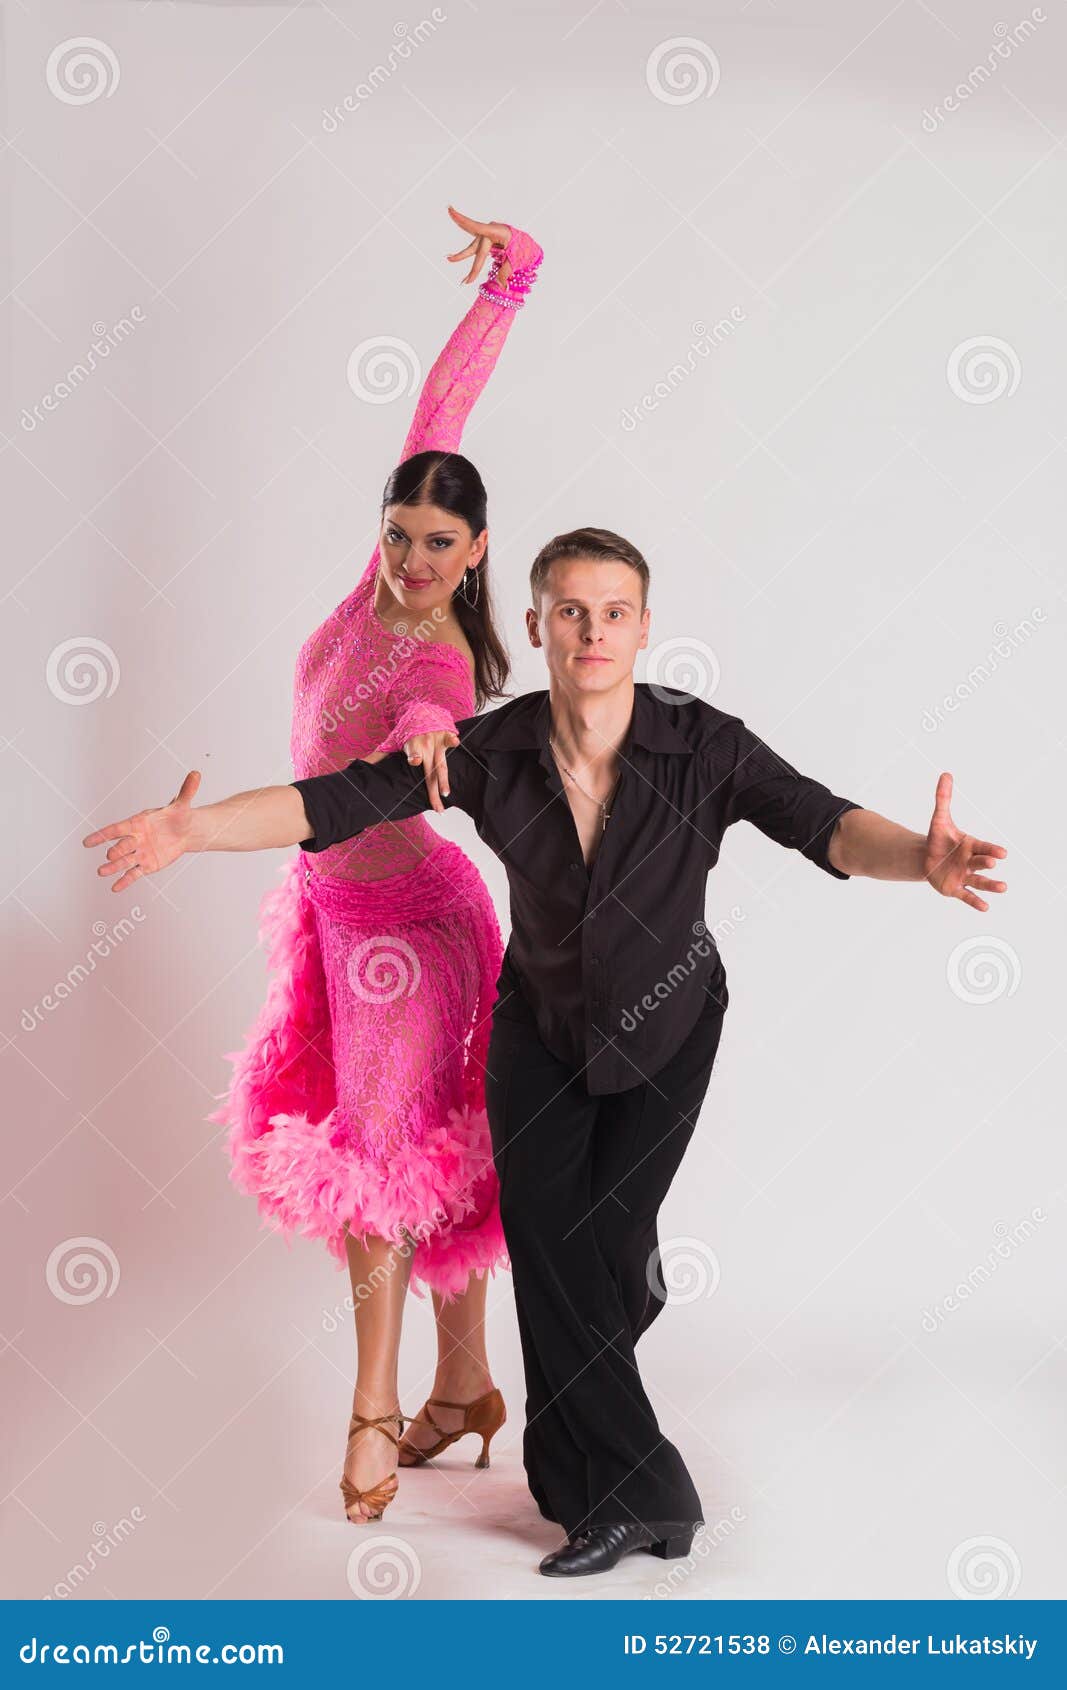 Premium Photo | Dance ballroom couple in a dance pose isolated on white  background